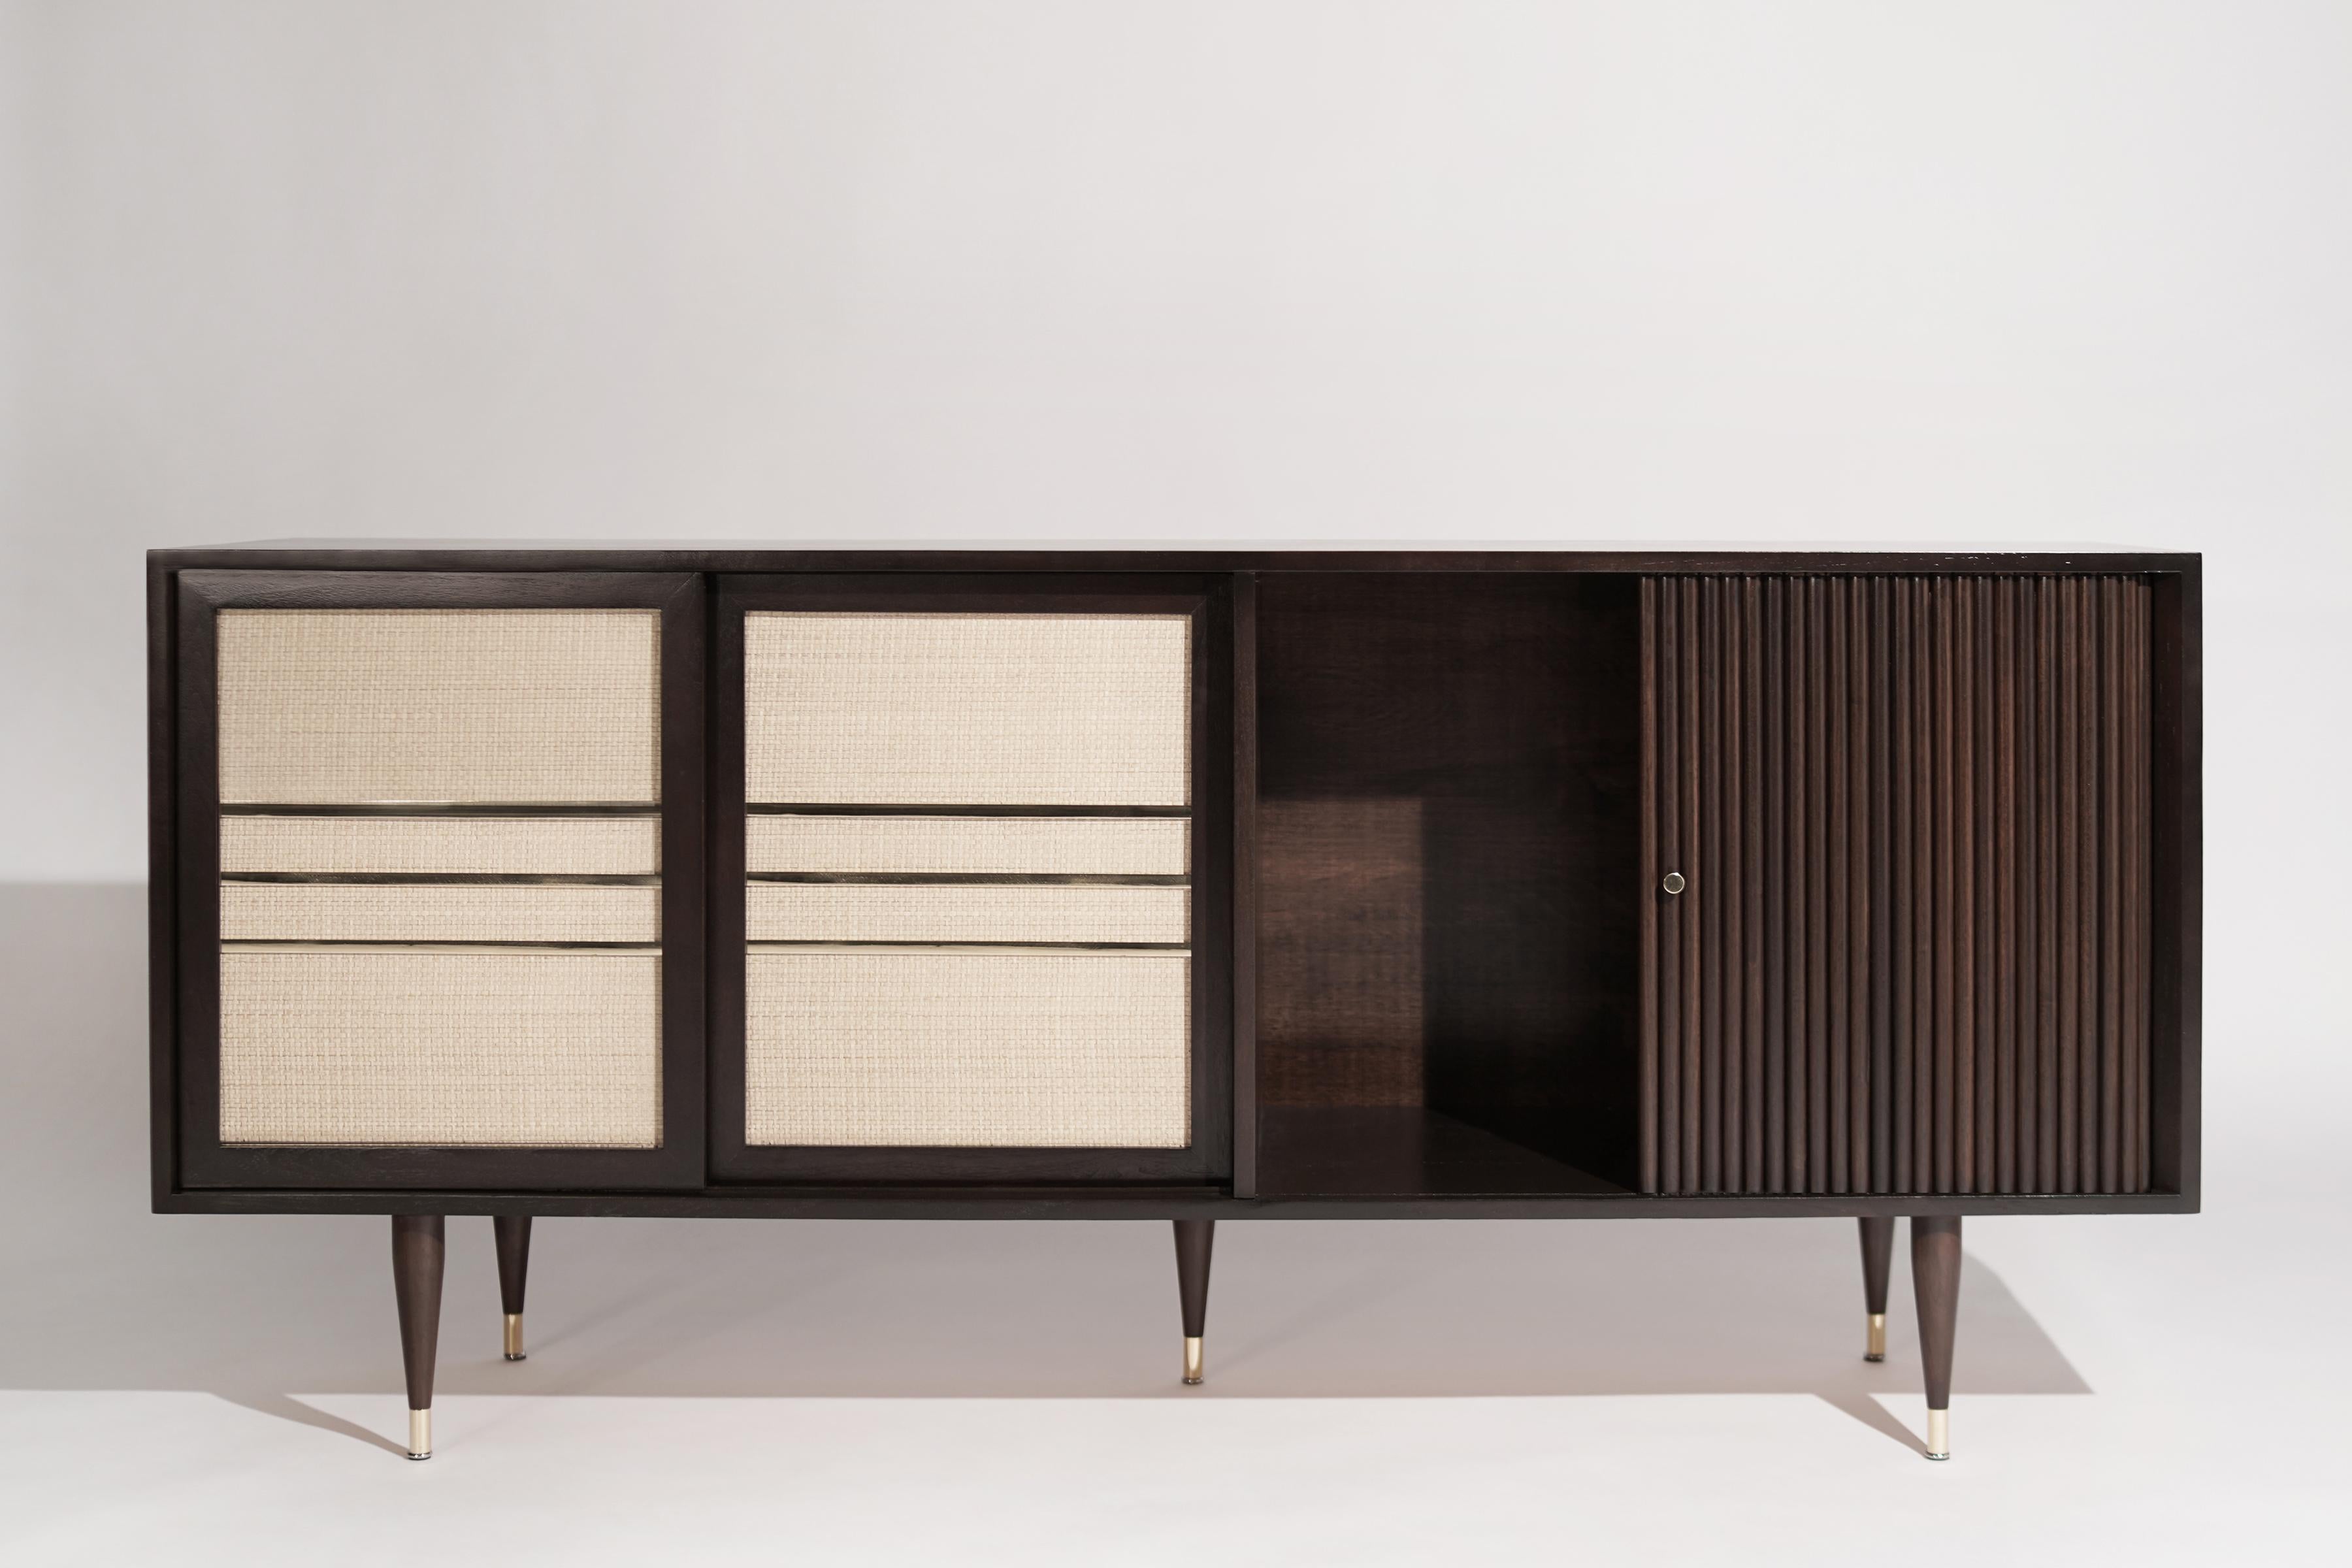 20th Century Mid-Century Brass and Walnut Credenza, C. 1950s For Sale